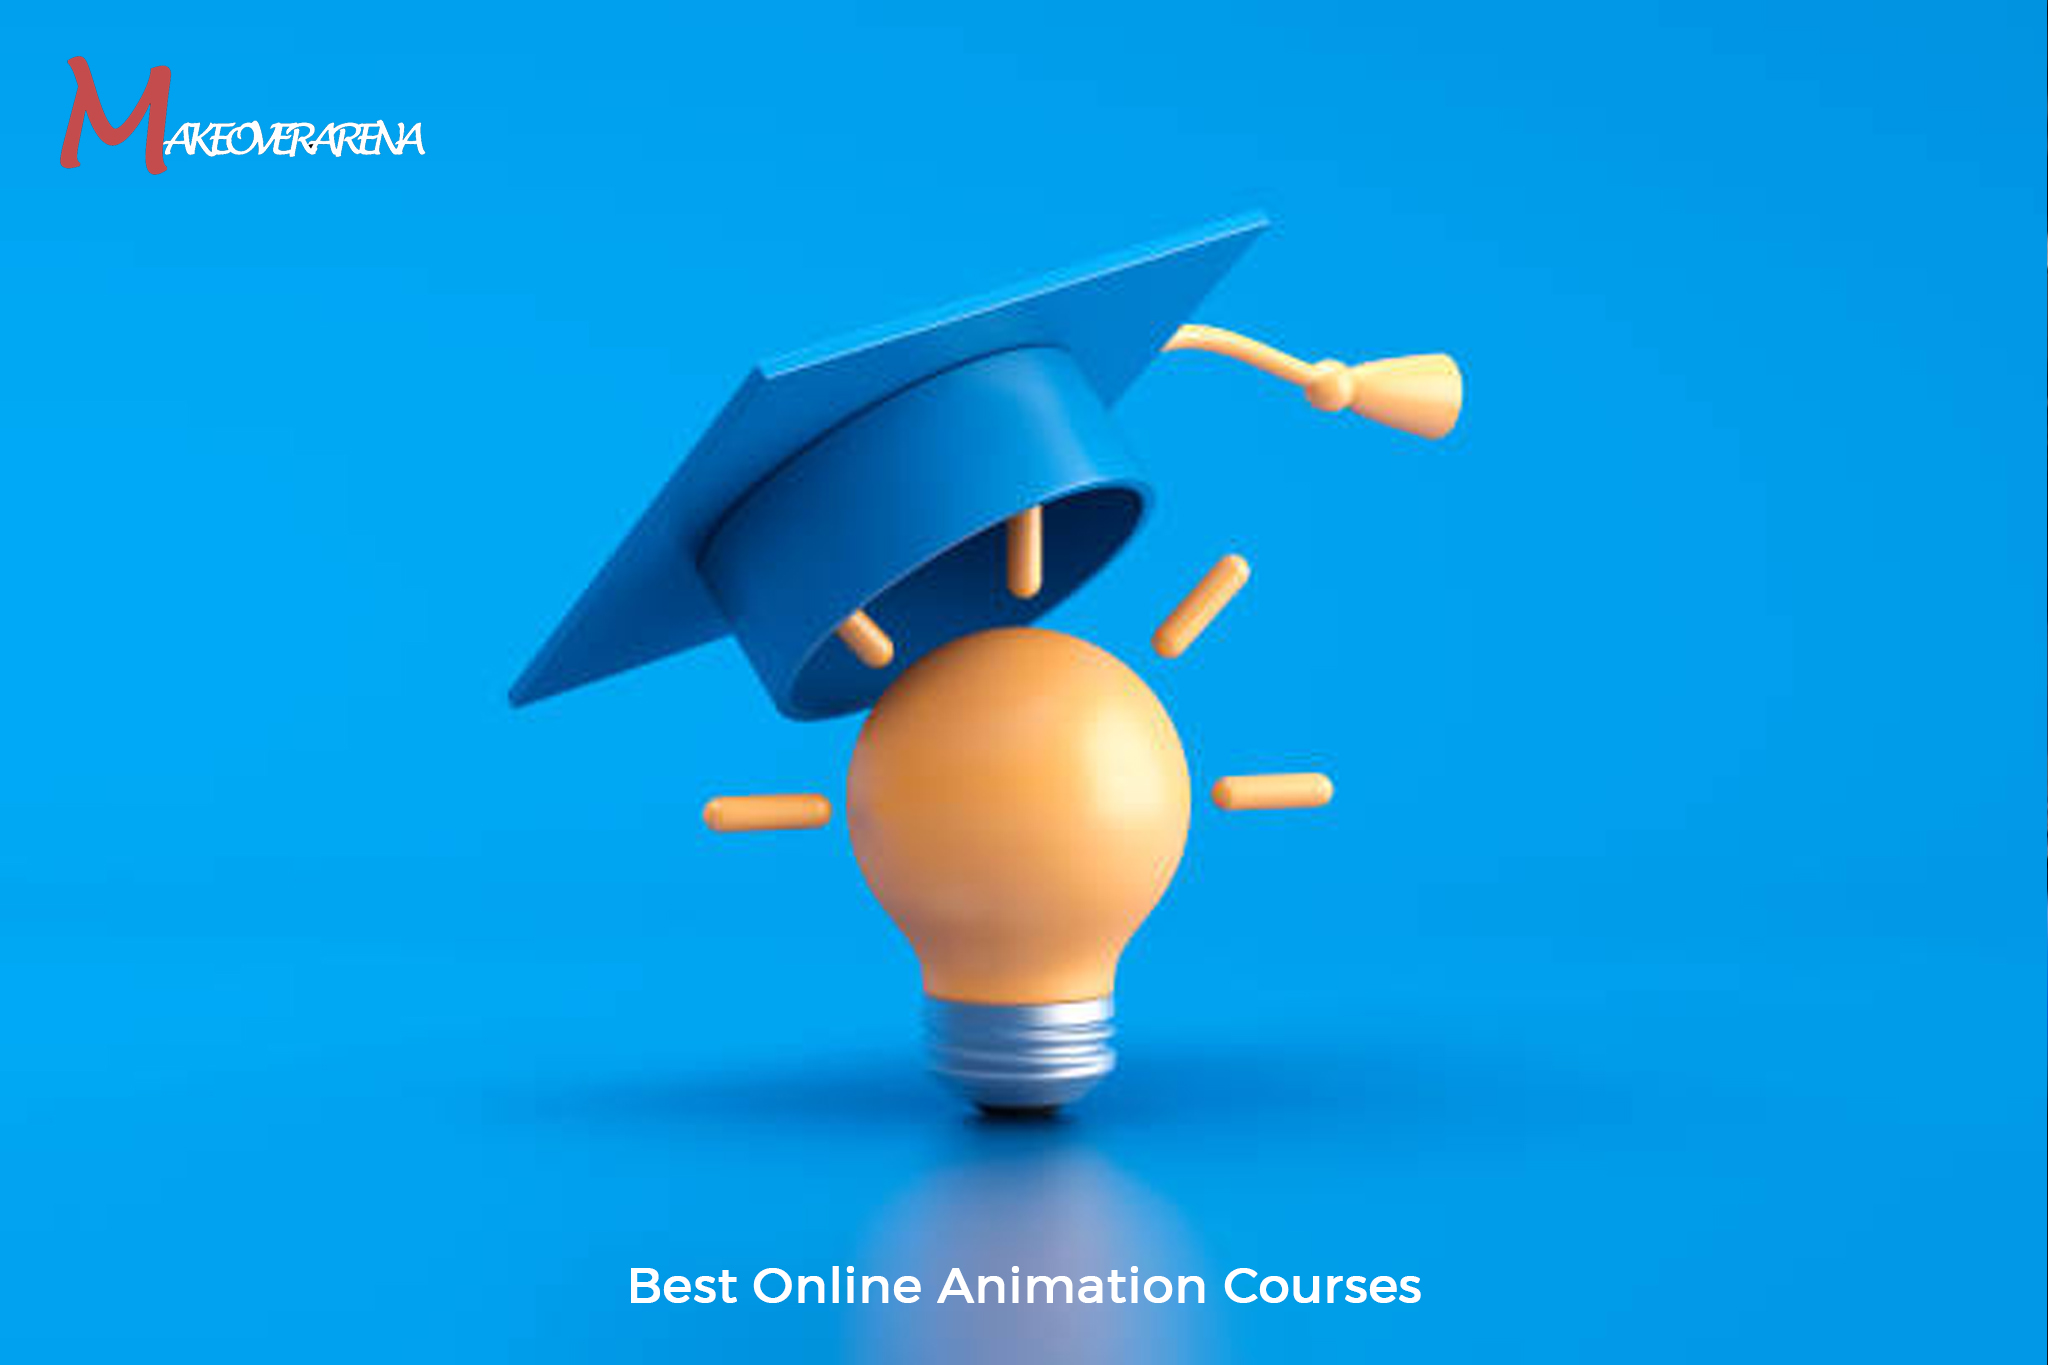 Best Online Animation Courses